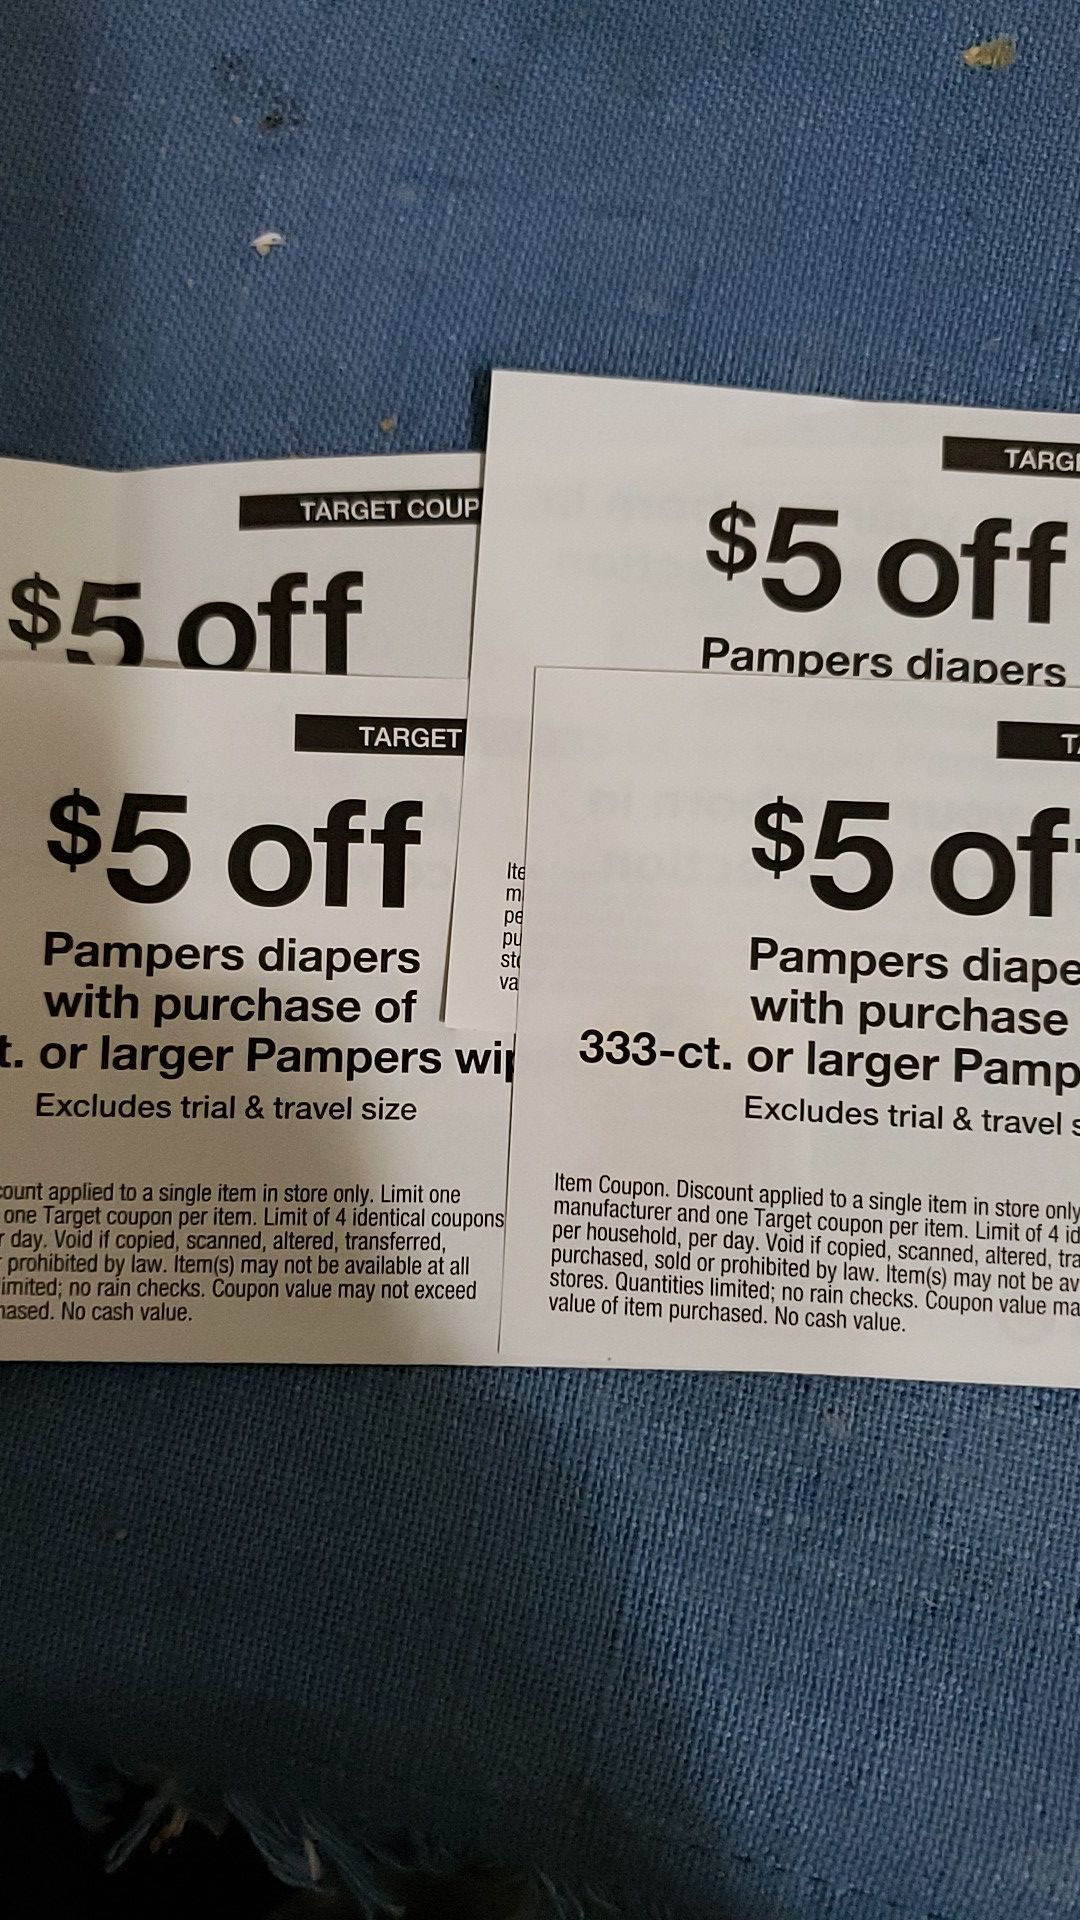 $5 off Pampers diapers